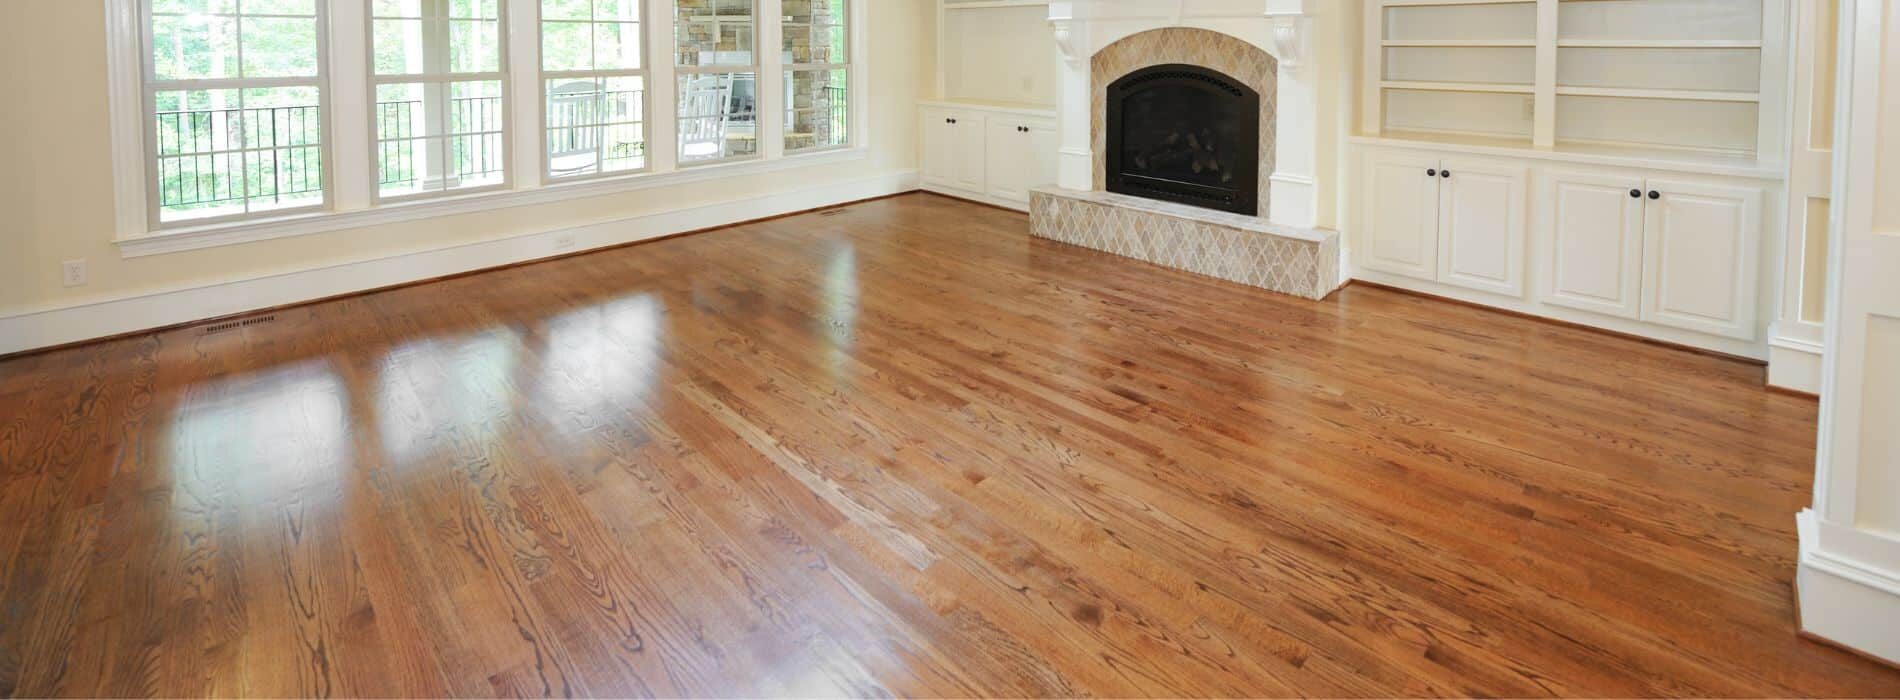 Expertly restored 8-year-old hardwood floor in Tufnell Park, N19. Bona 2K Frost whitewashing and Traffic HD 15% sheen matte lacquer used by Mr Sander®. Durable and stunning finish for long-lasting beauty.